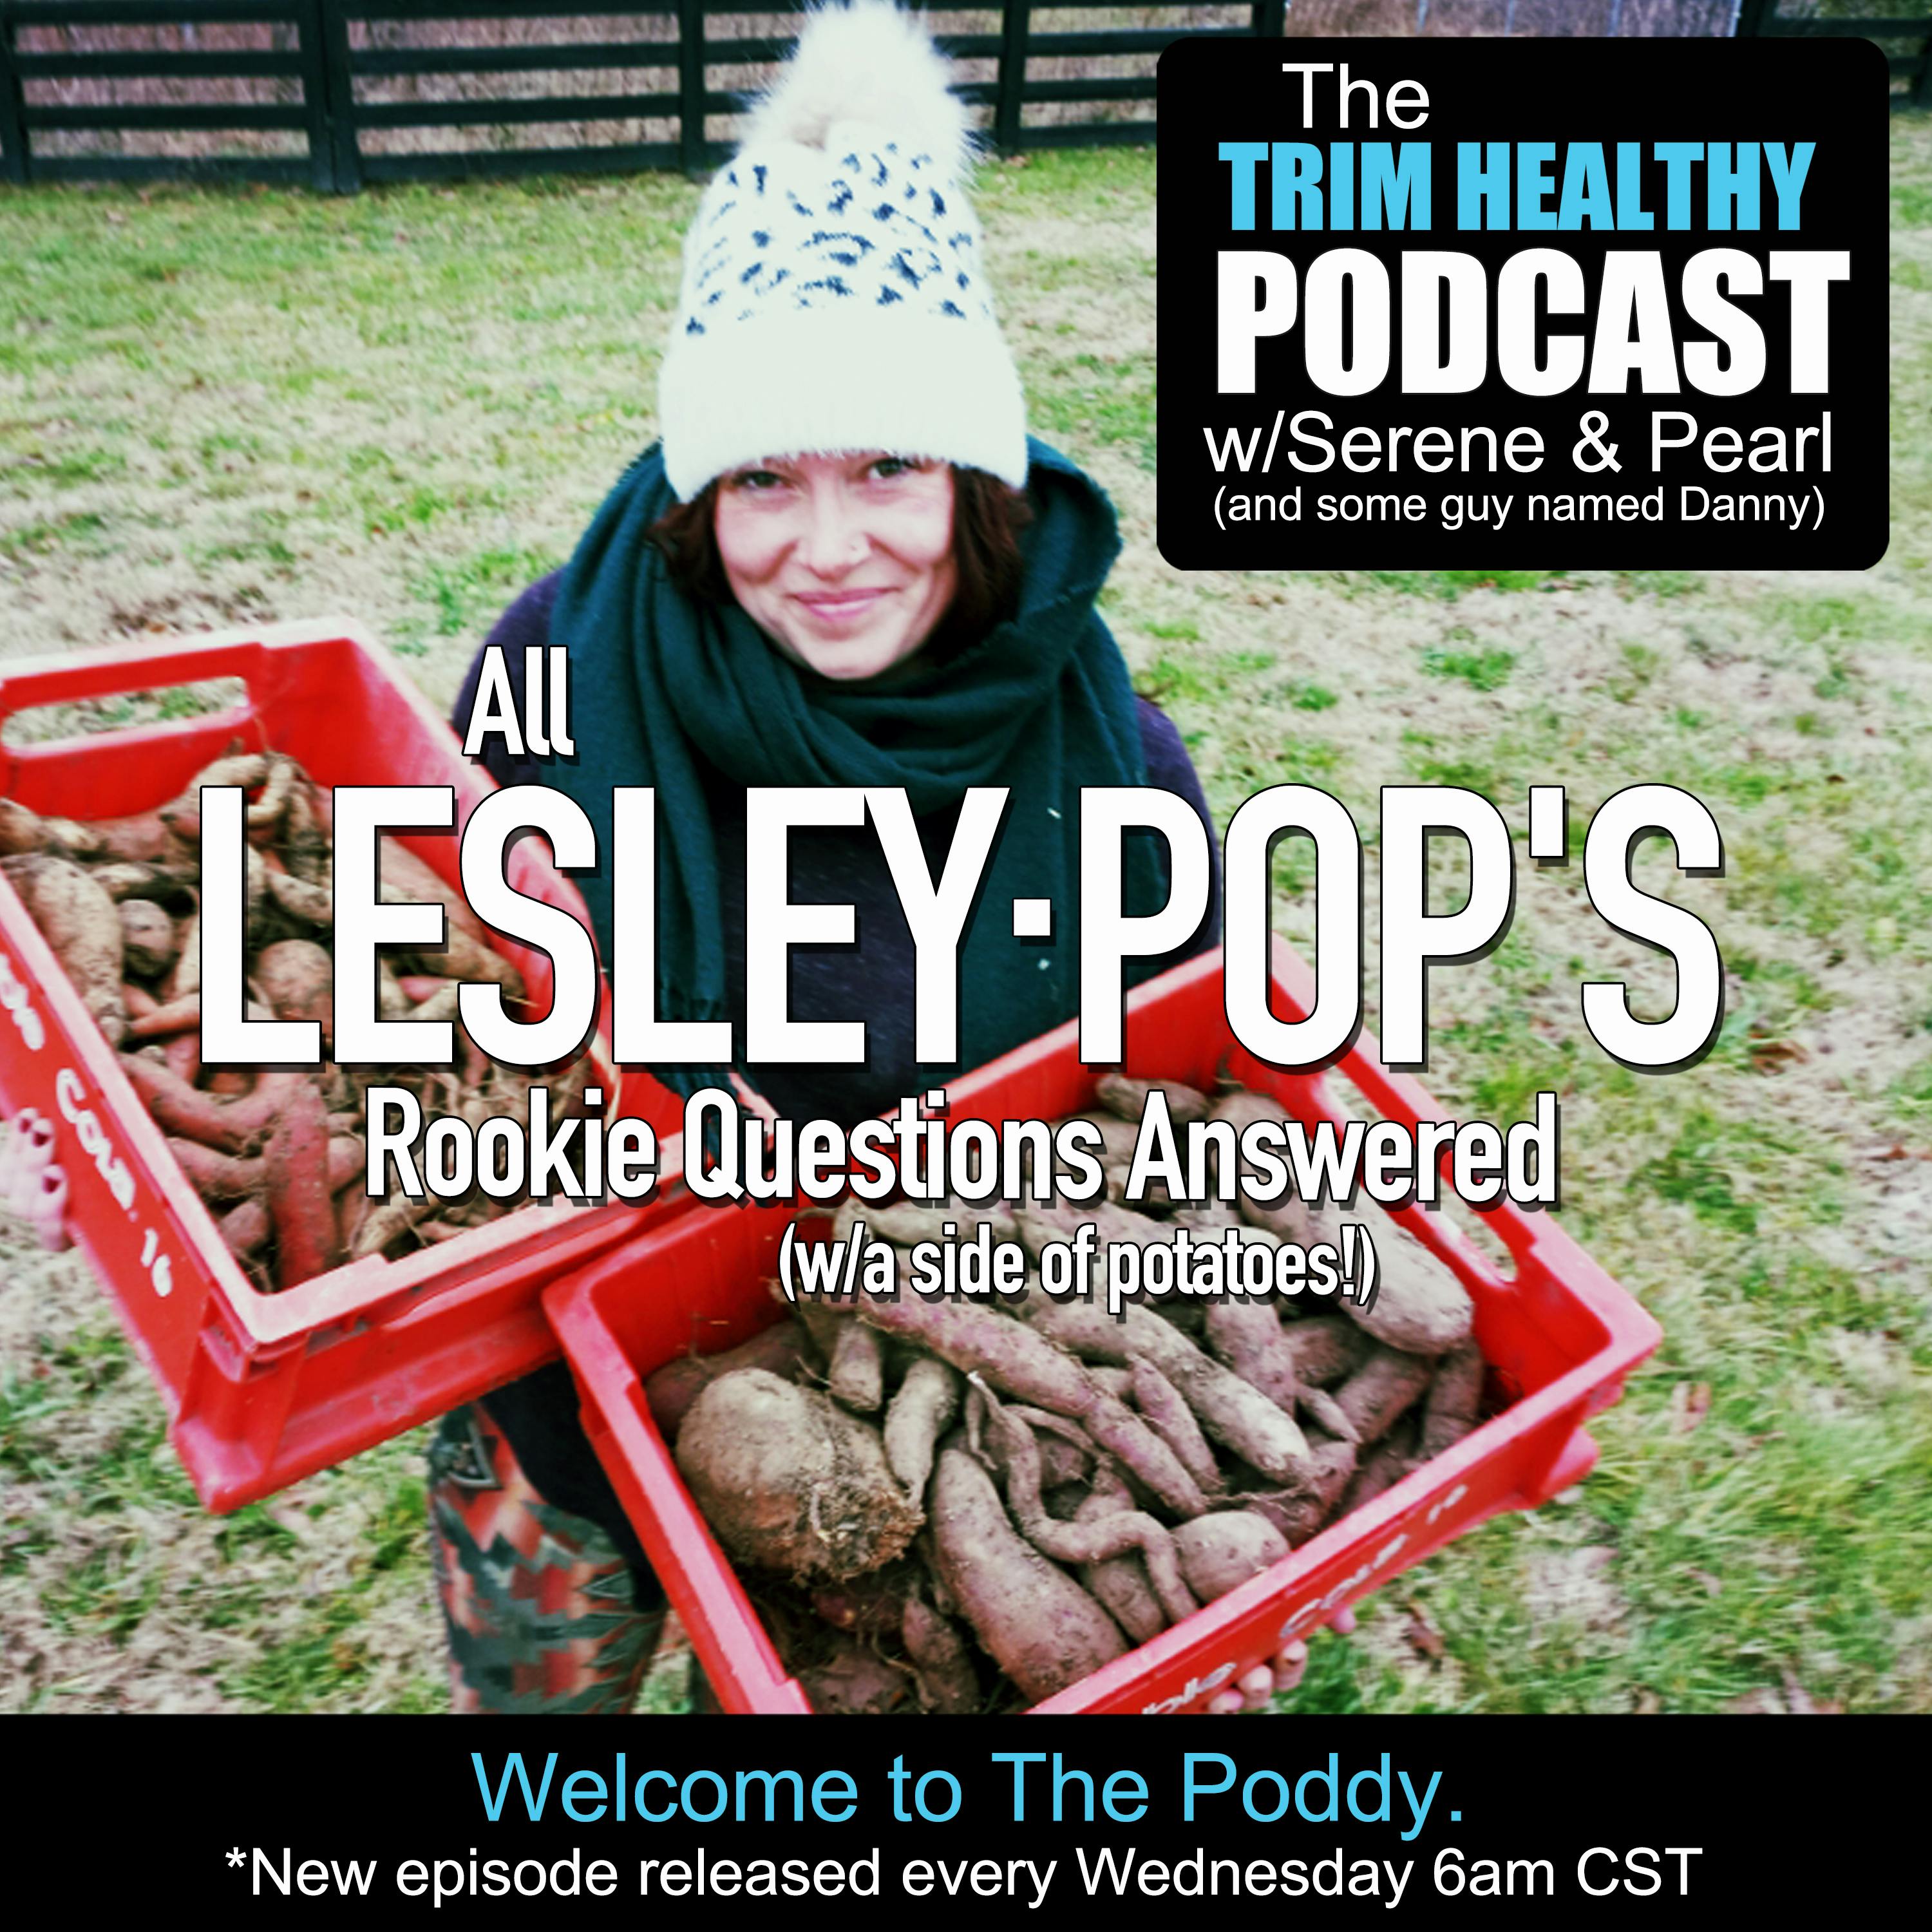 Ep 203: All Lesley-Pop’s Rookie Questions Answered (w/a side of potatoes!)